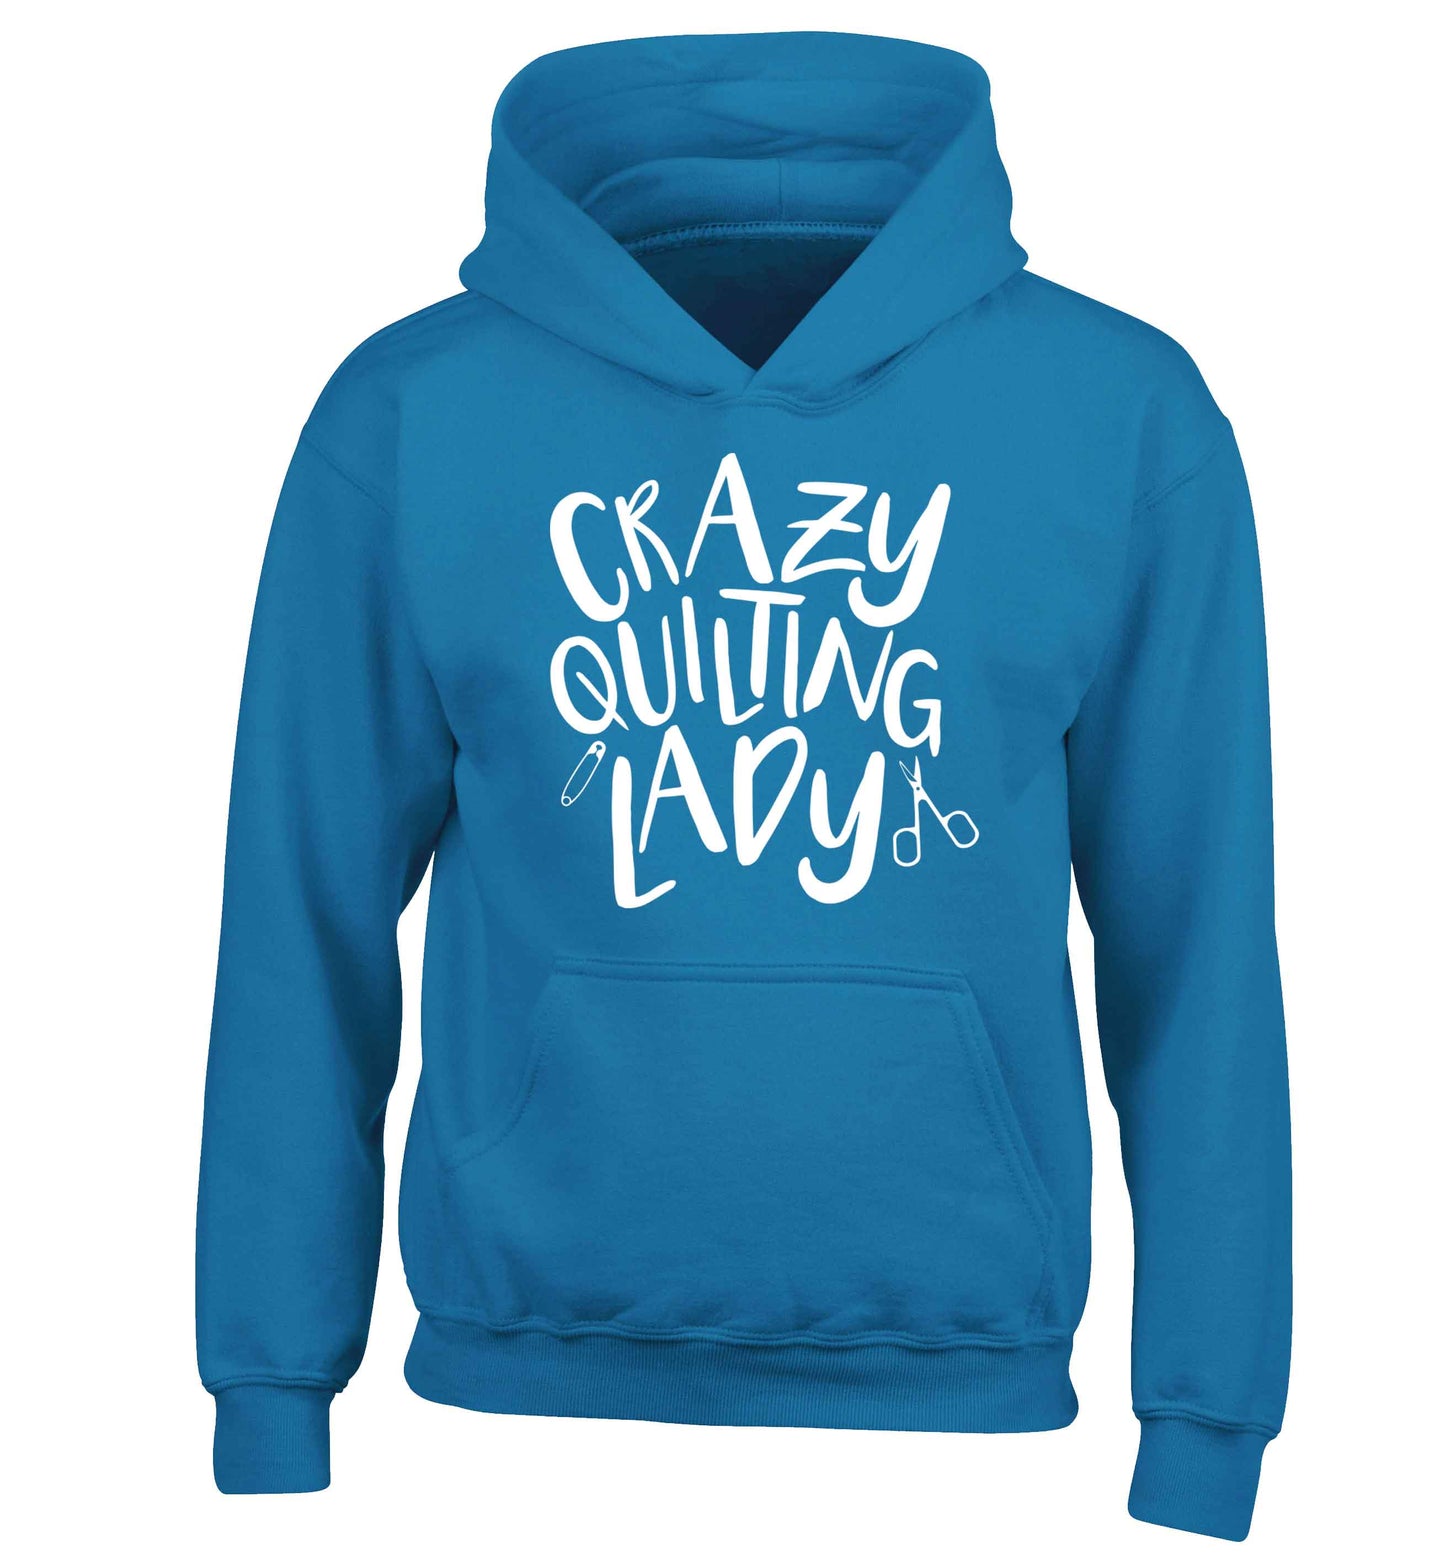 Crazy quilting lady children's blue hoodie 12-13 Years